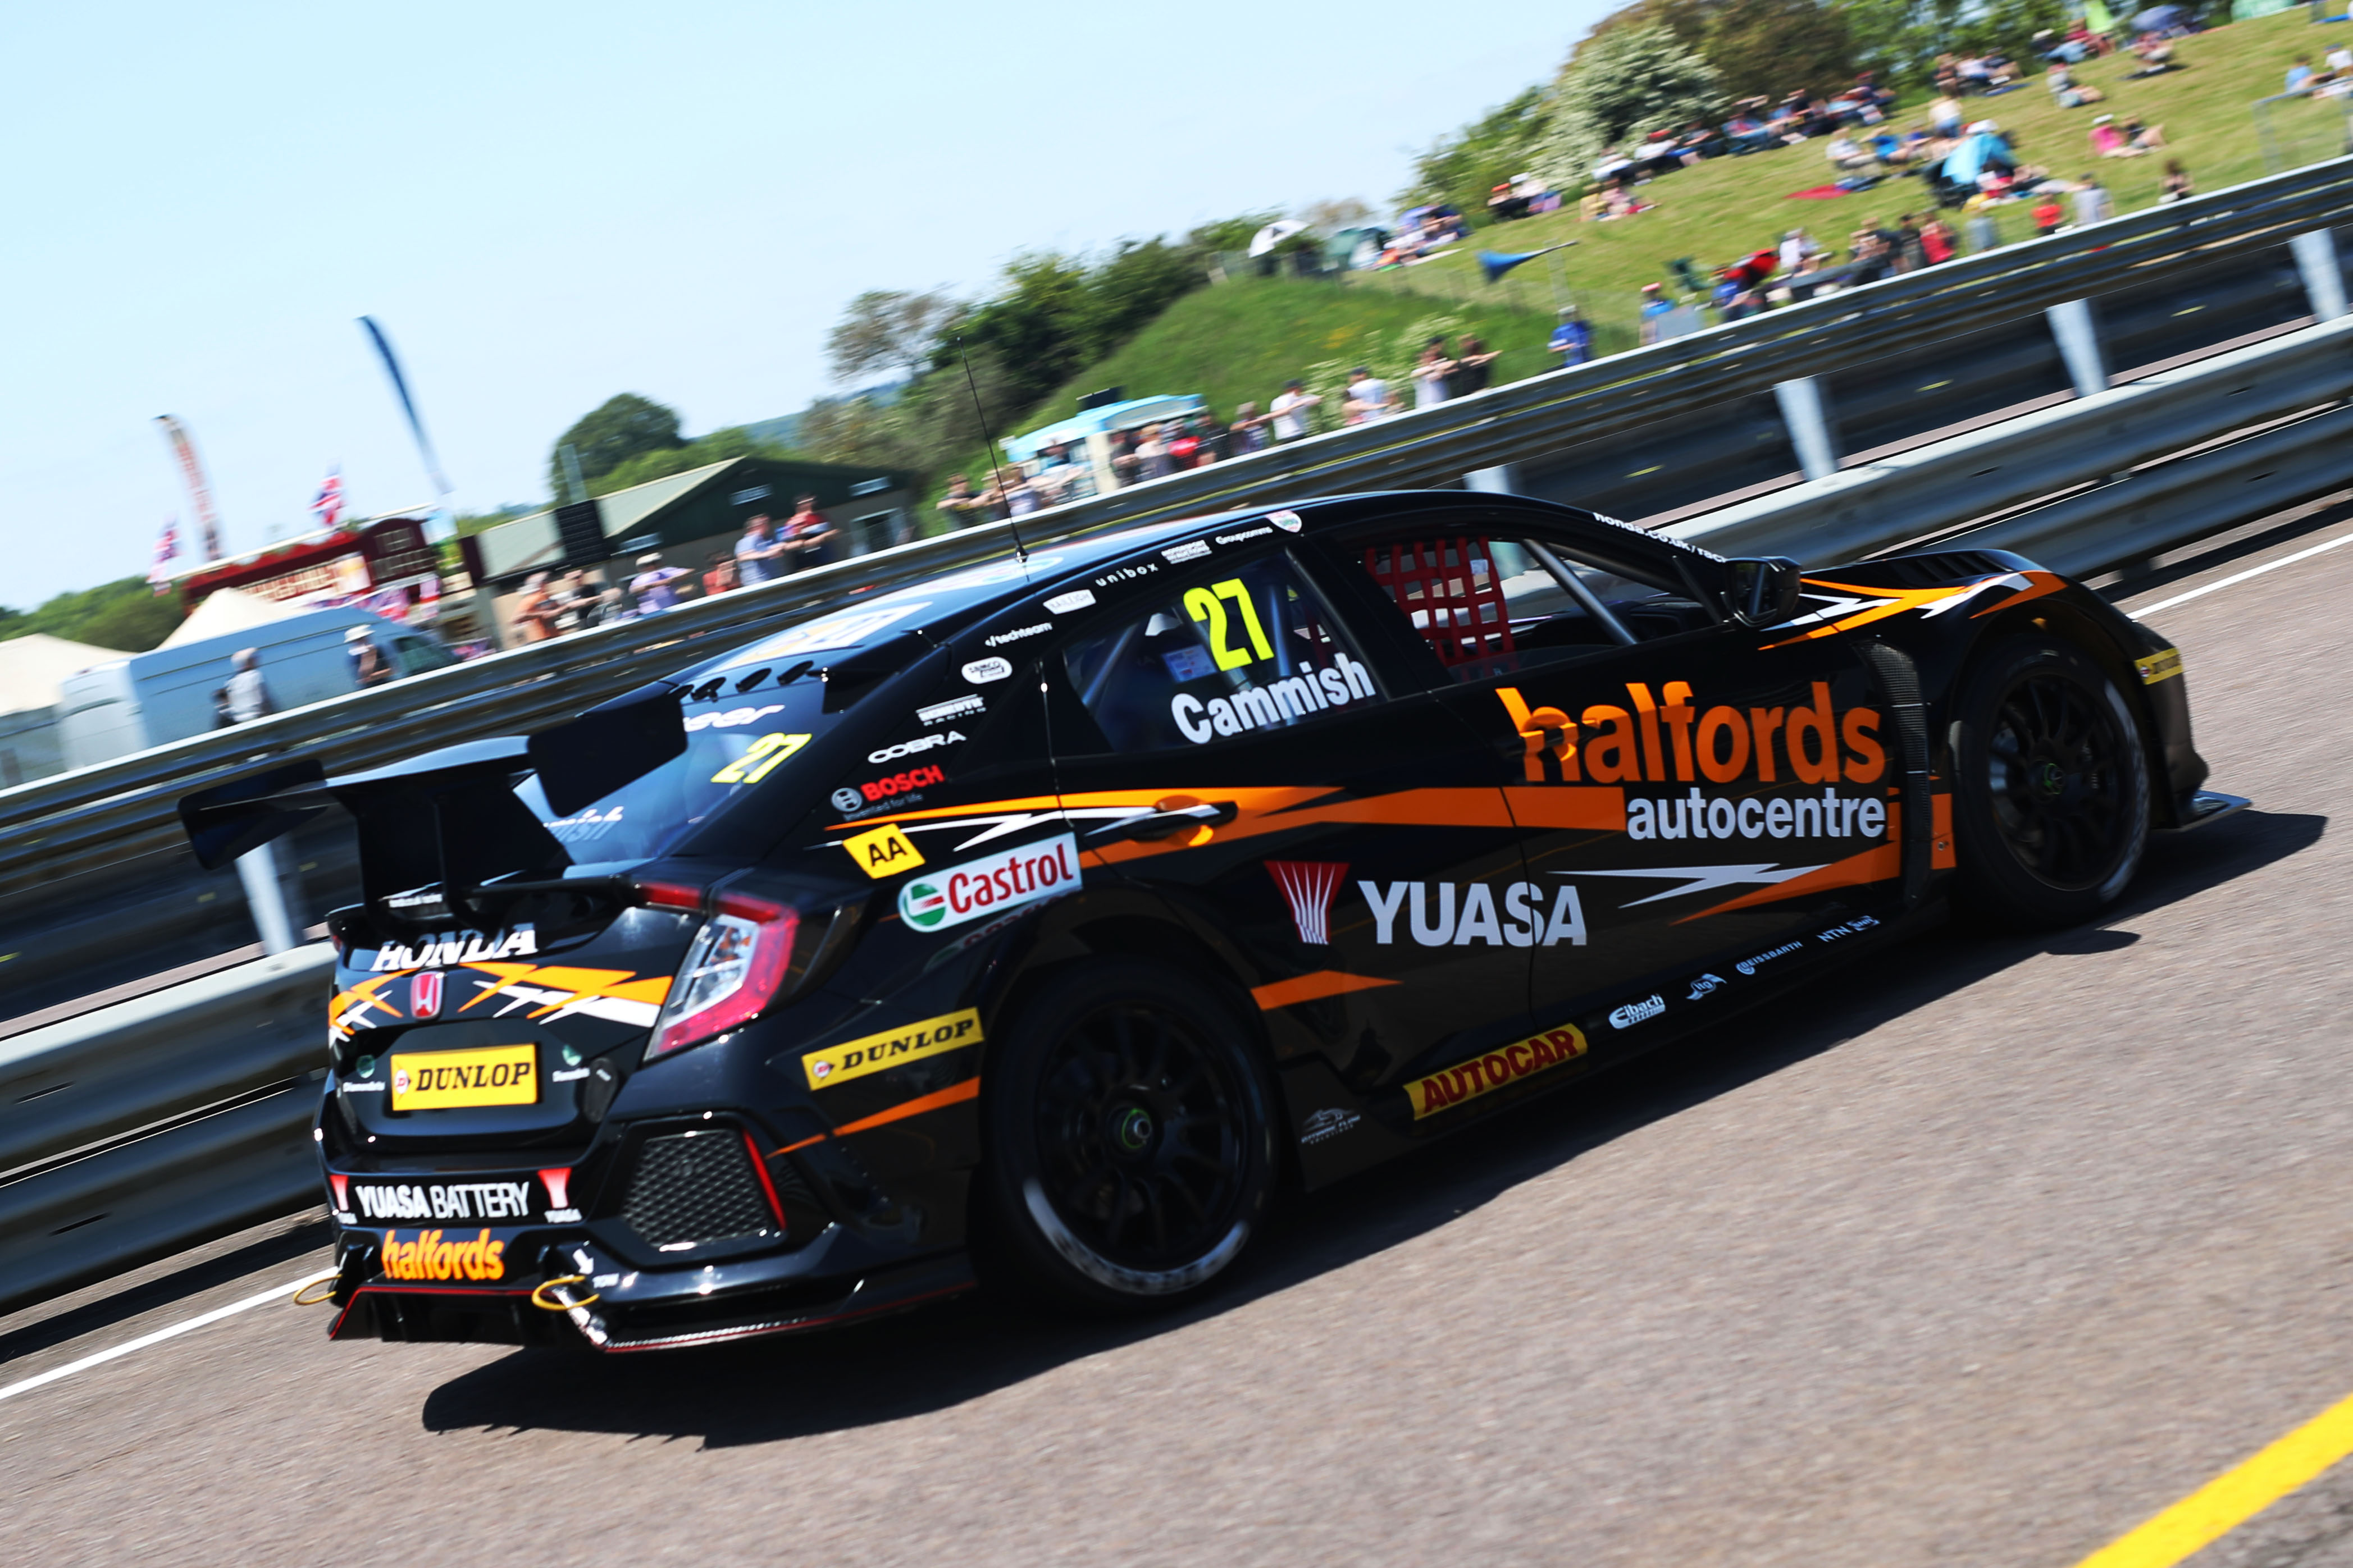 The sun was certainly shining on Matt Neal in his Halfords Yuasa Racing Honda as he produced a mind-blowing lap during qualifying for Round 7 of the 2018 Dunlop MSA British Touring Car Championship.